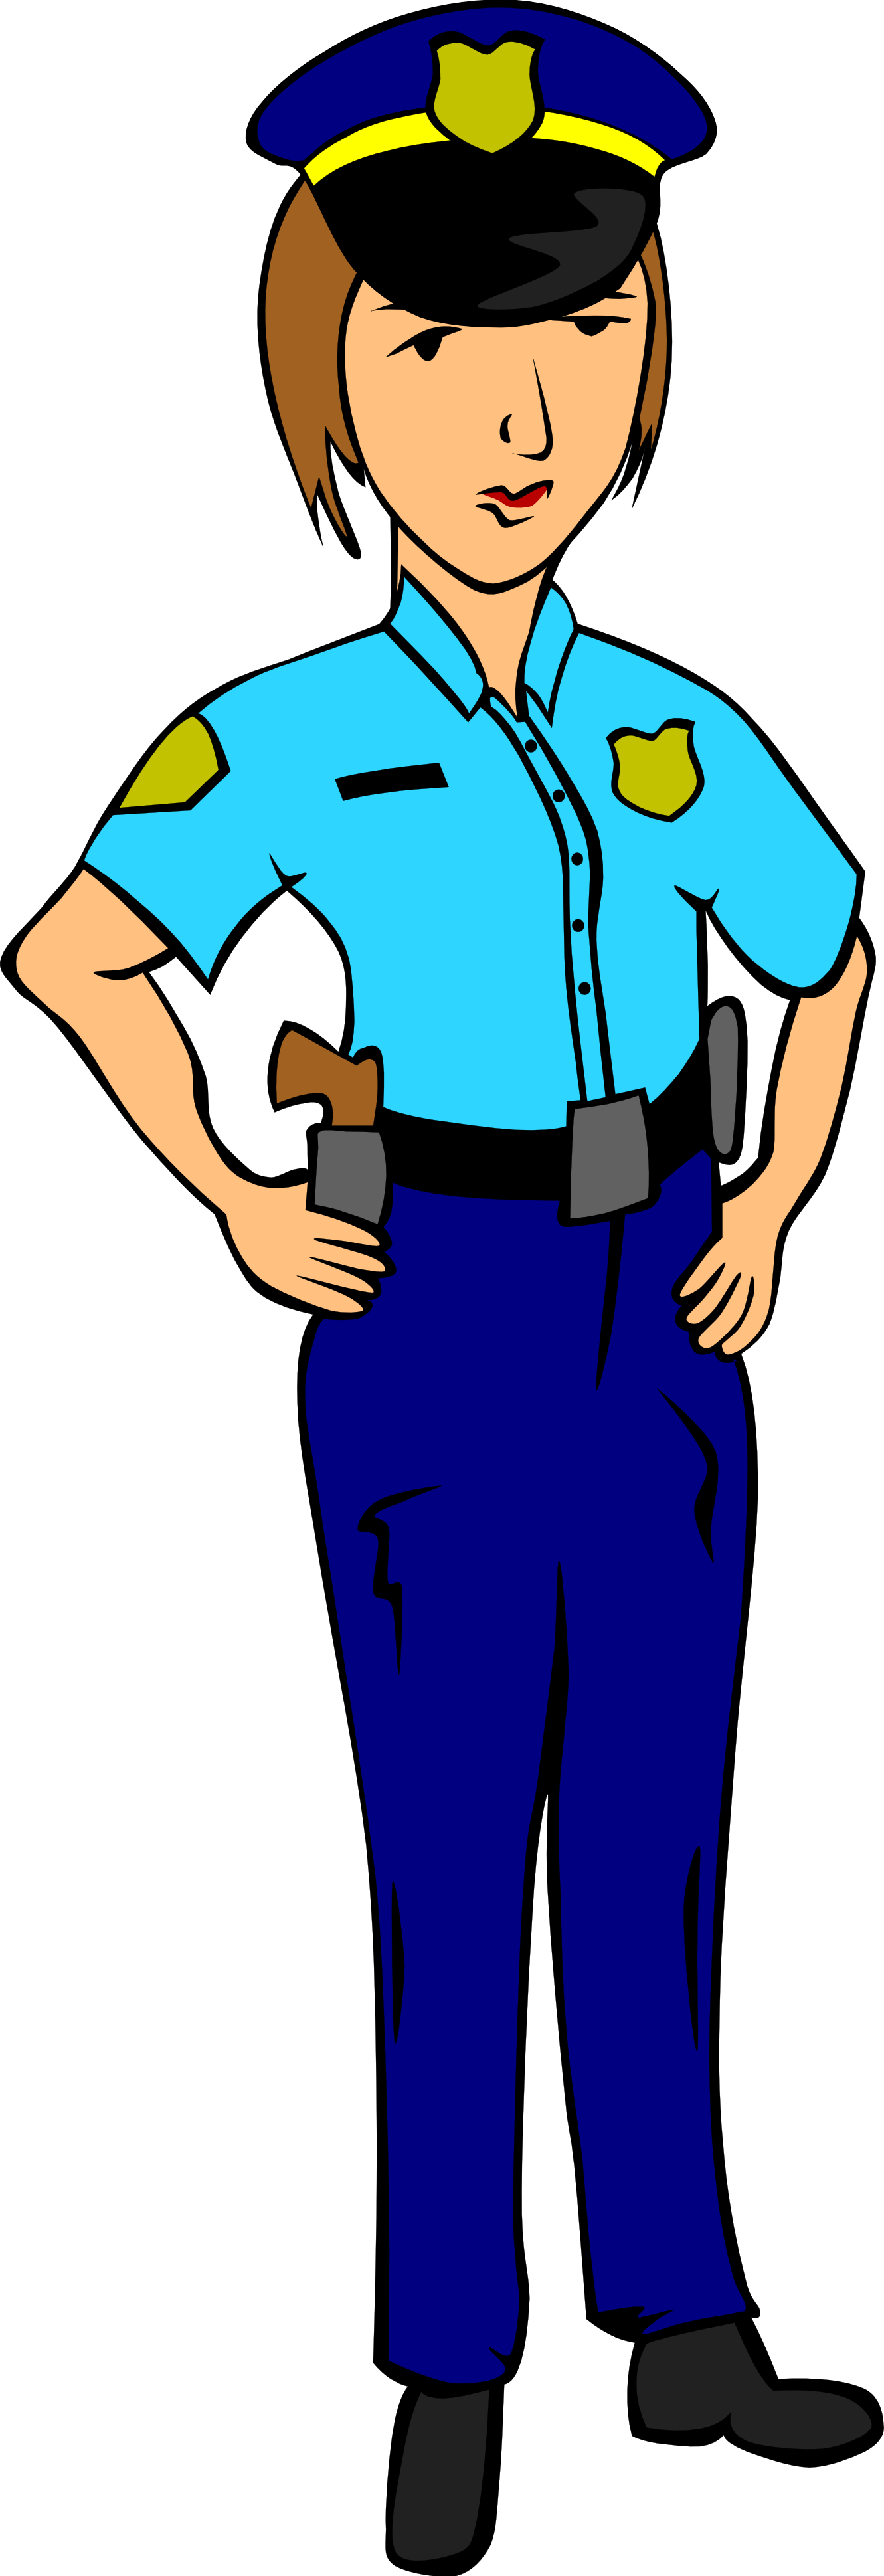 Female Police Officer Clipart | Clipart Panda - Free Clipart Images